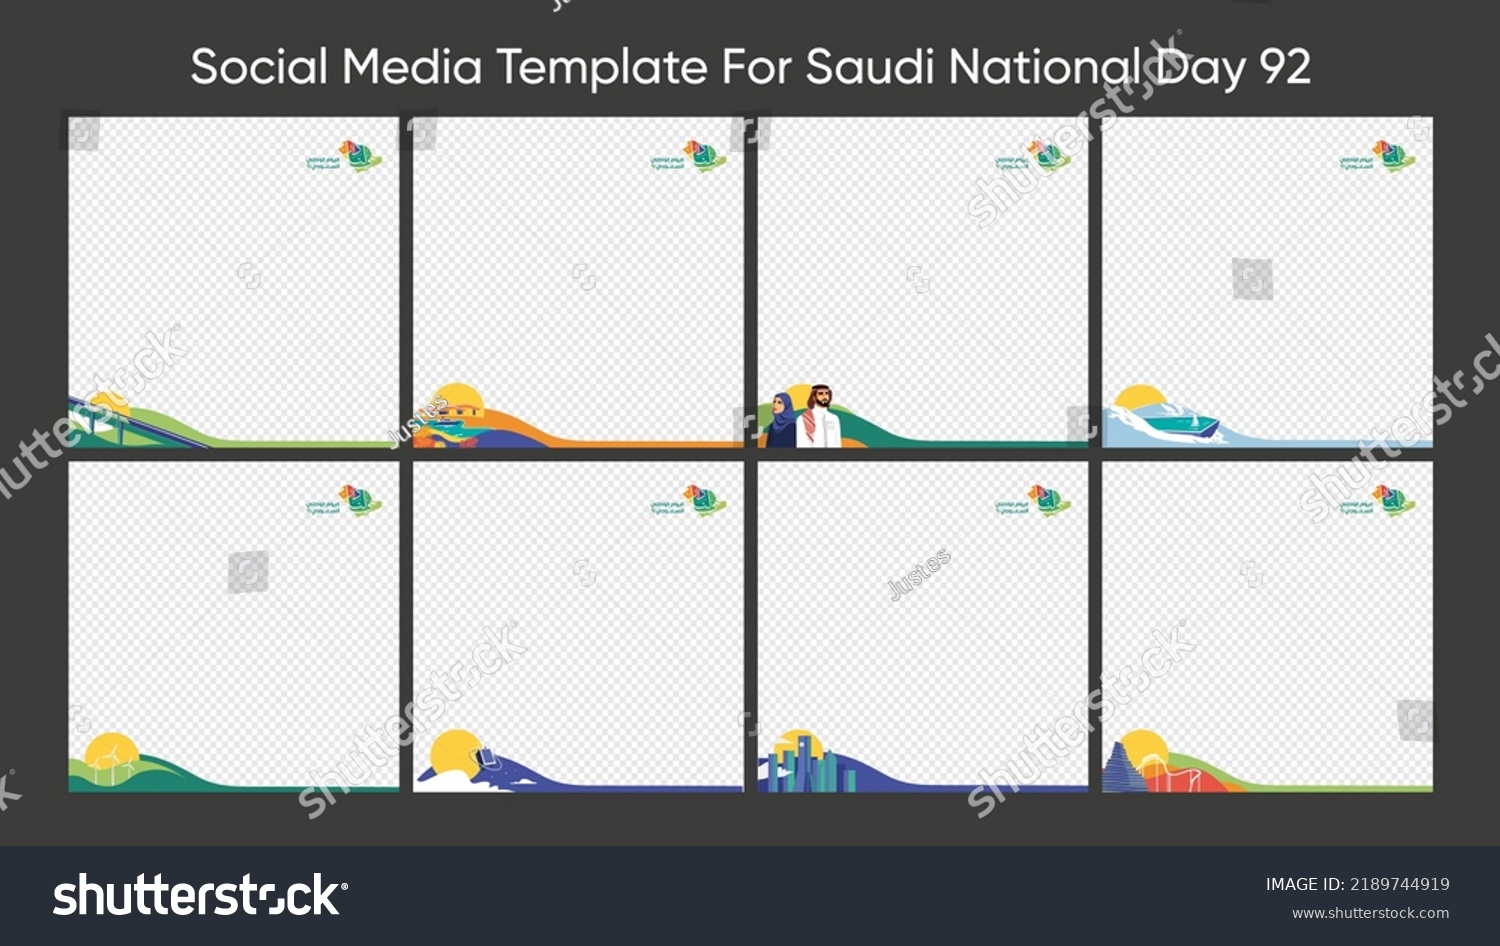 social media designs for Saudi National day 92 with Arabic text (It's our home) and (Saudi national day 92) flat illustrations. #2189744919